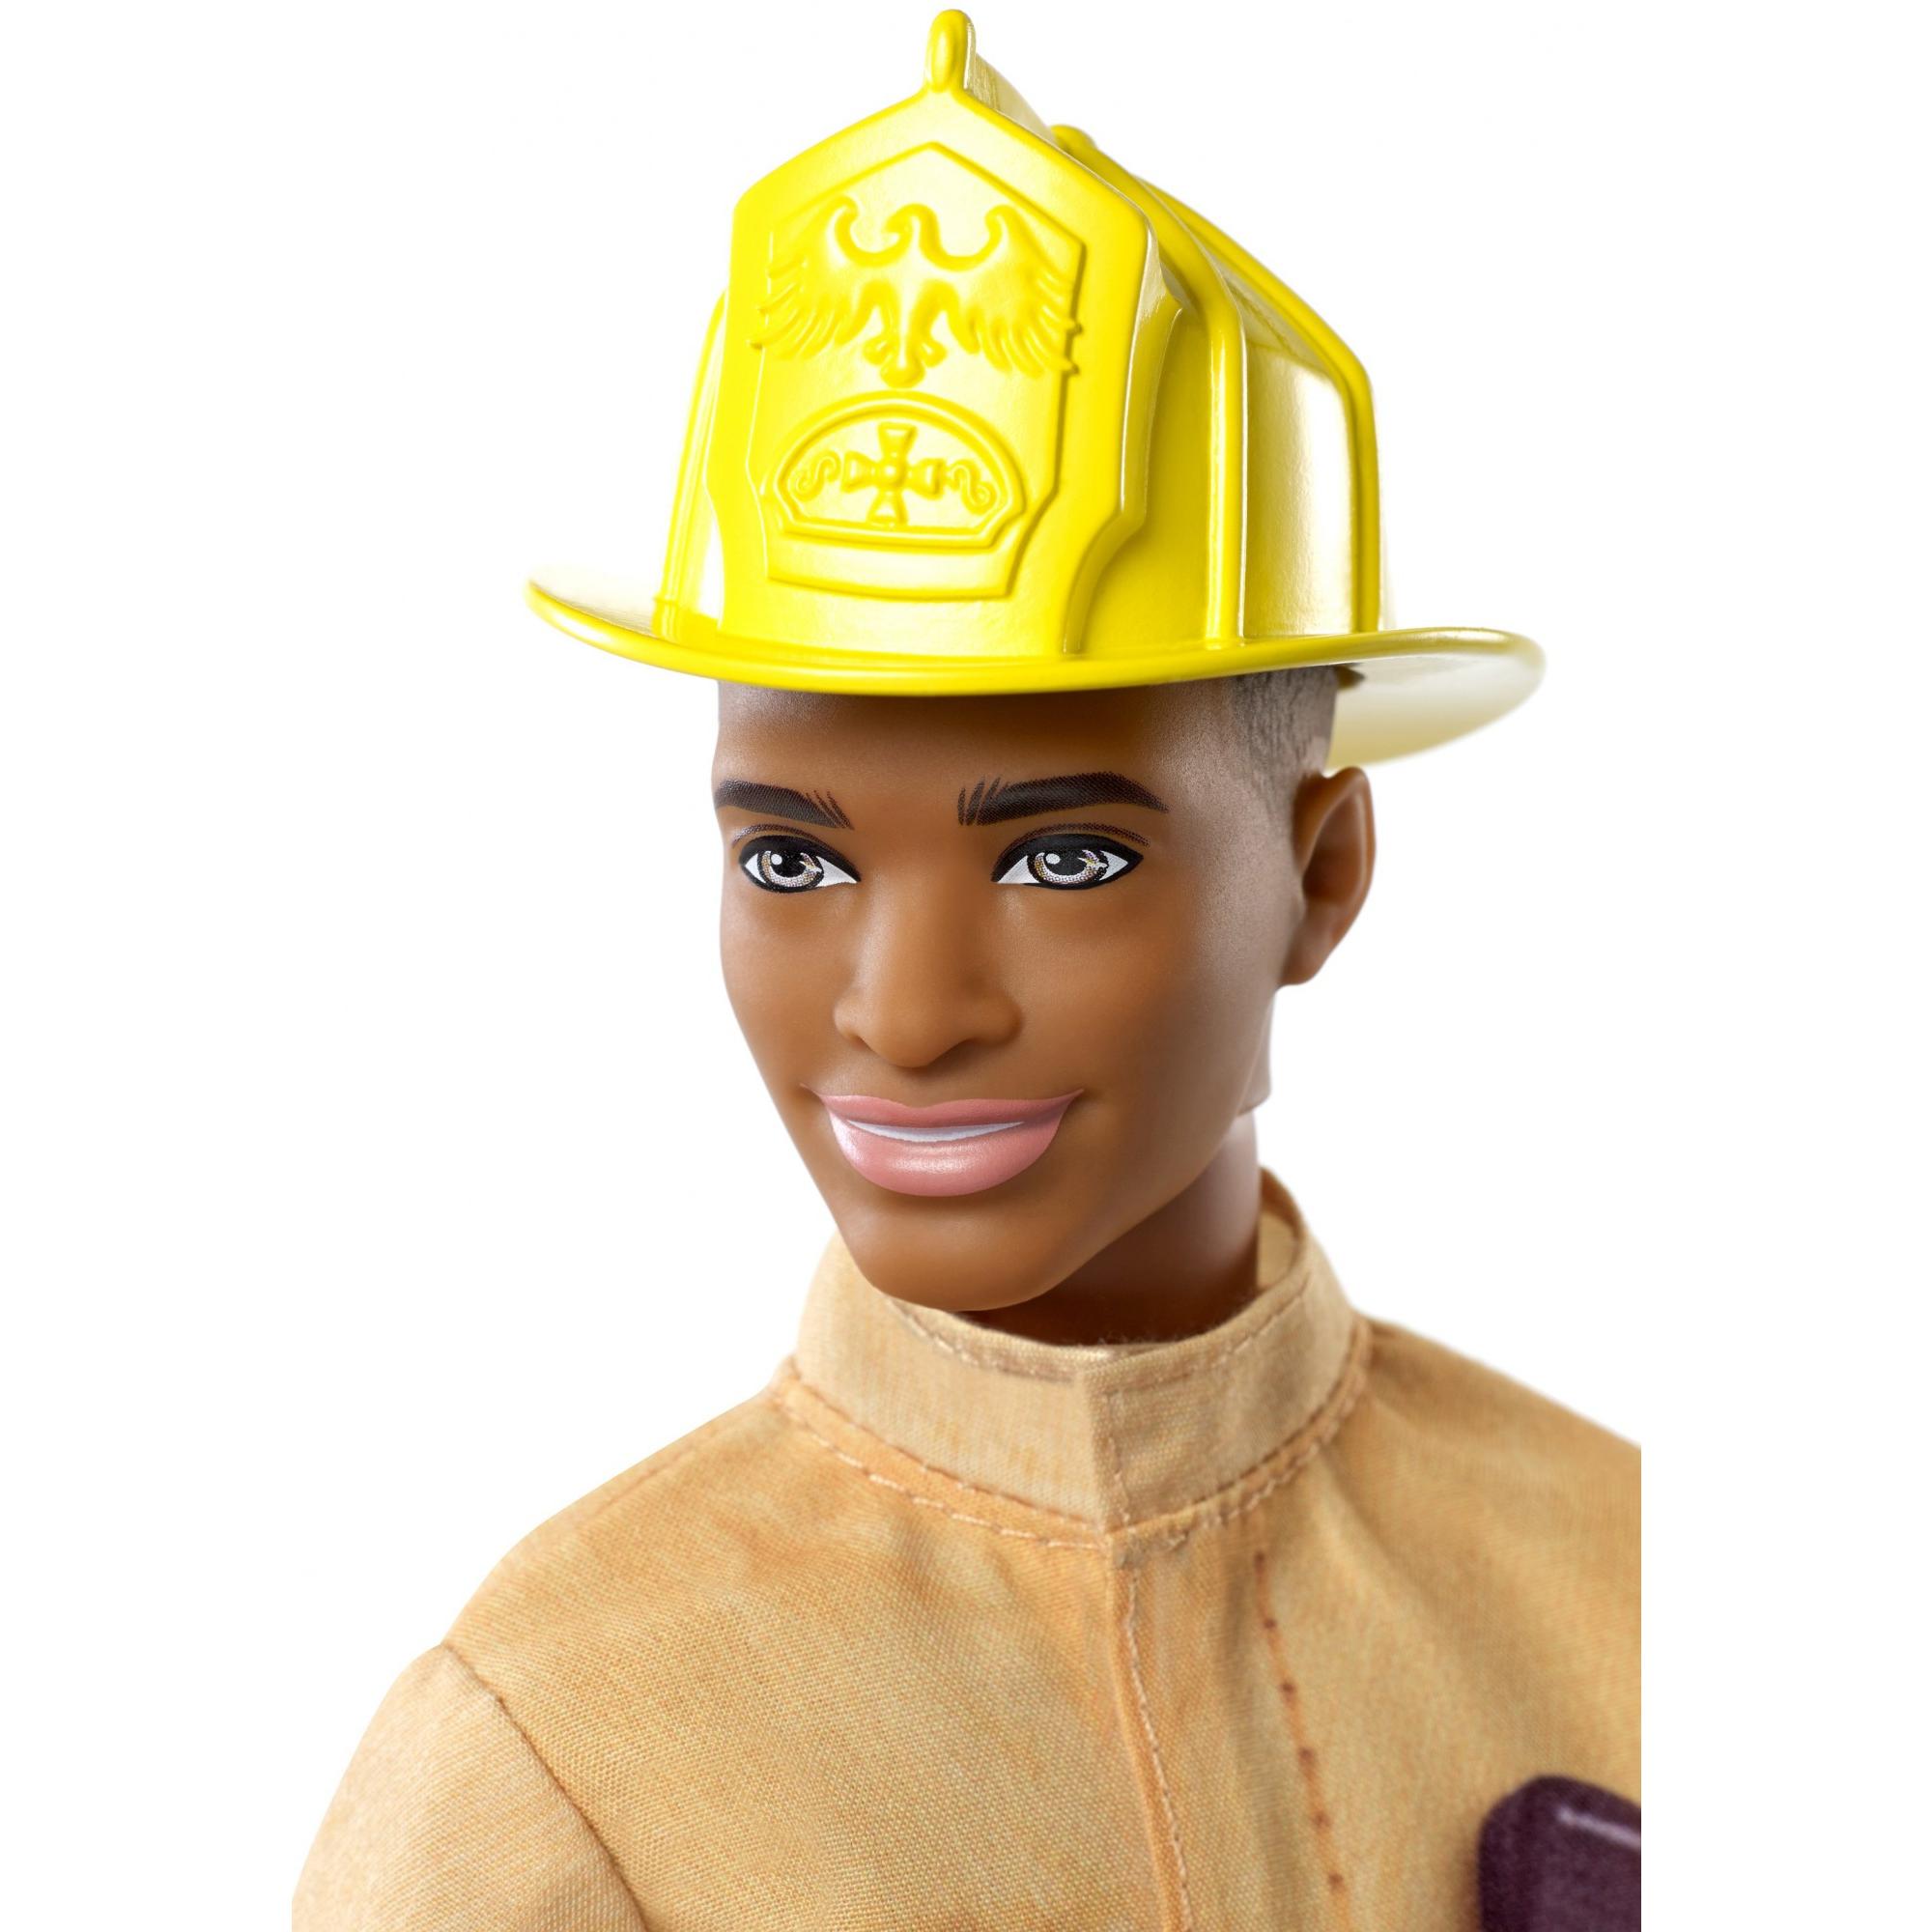 Barbie Ken Careers Firefighter Doll with Career-Themed Accessories - image 4 of 6